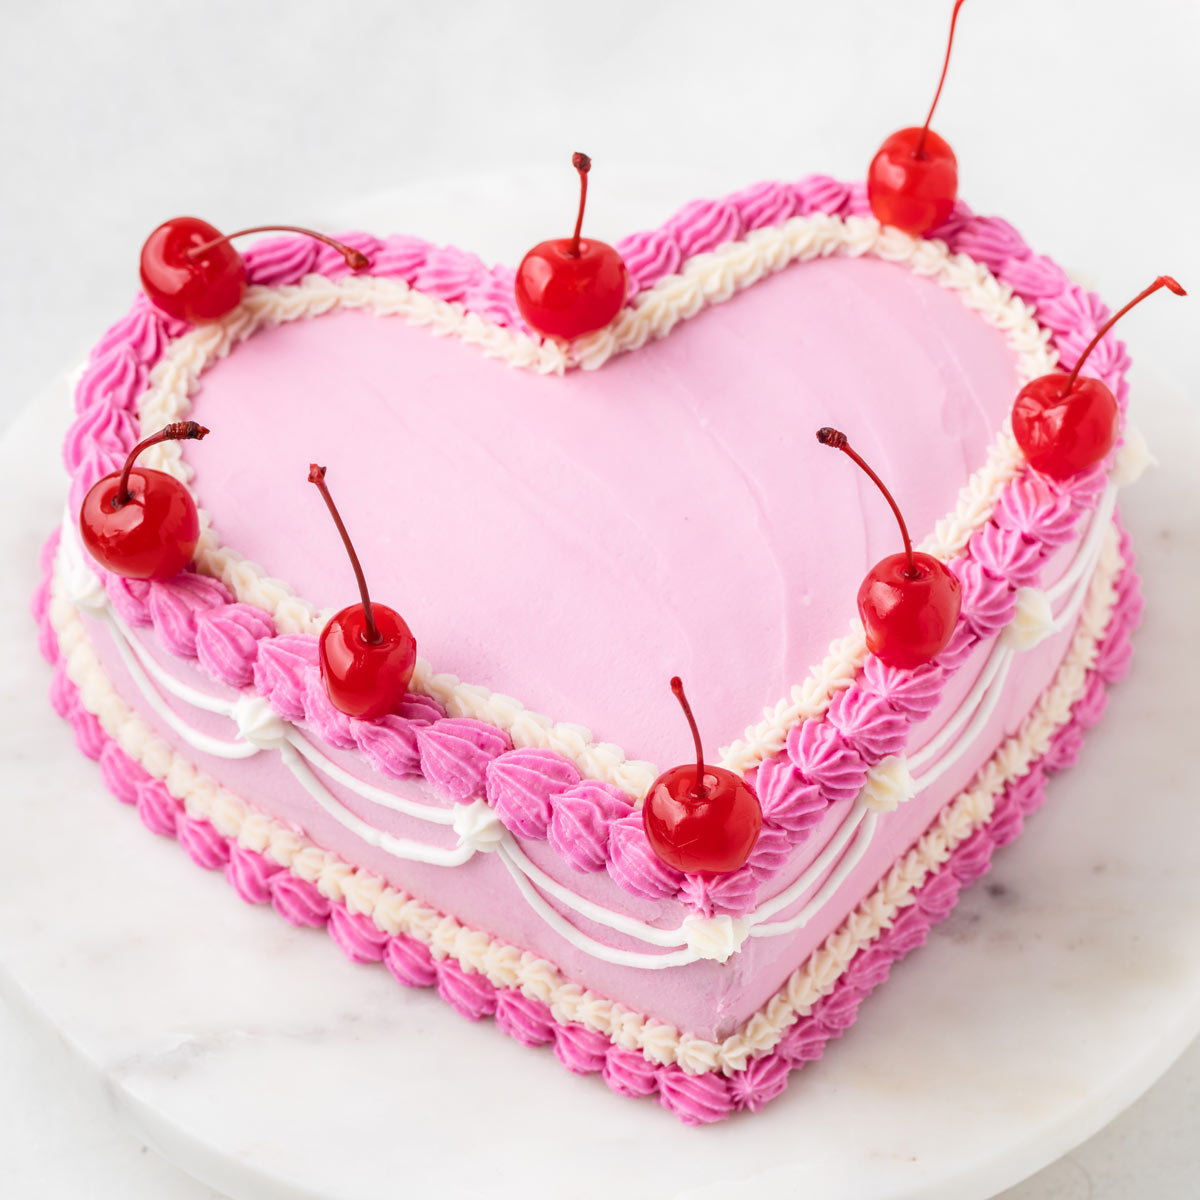 Strawberry Cheesecake Heart Surprise Cake for Valentine's Day